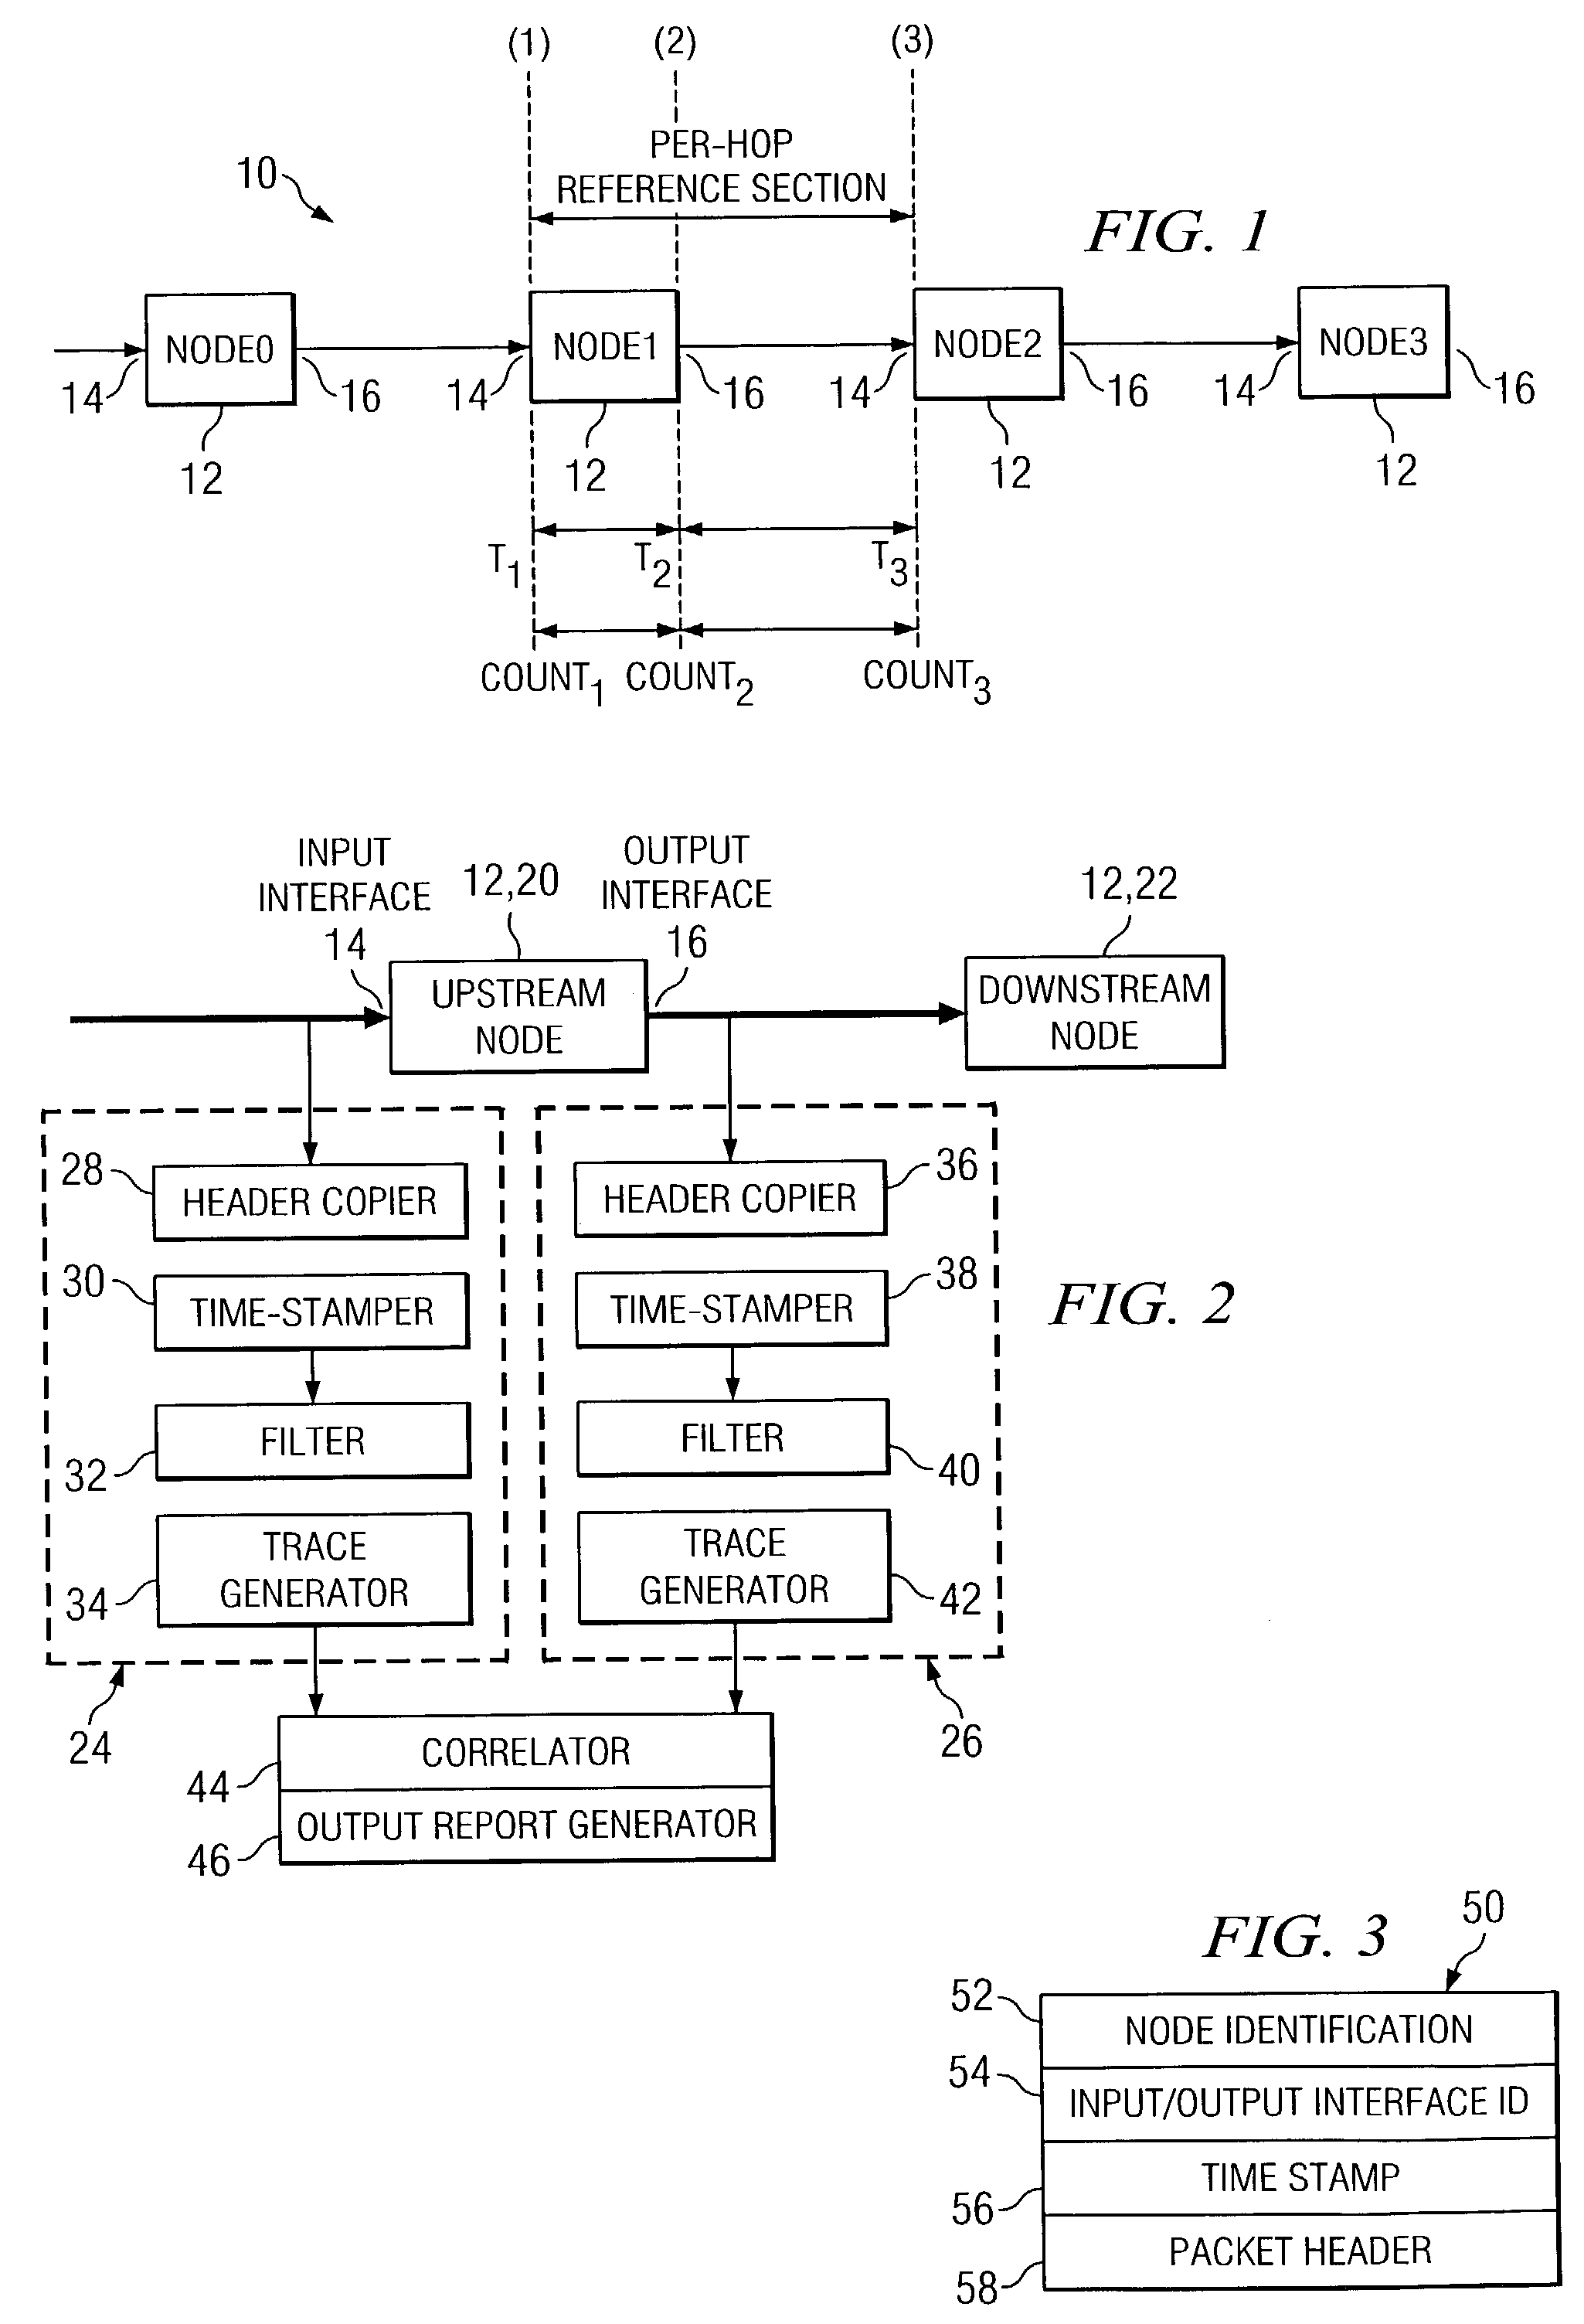 Measurement architecture to obtain per-hop one-way packet loss and delay in multi-class service networks